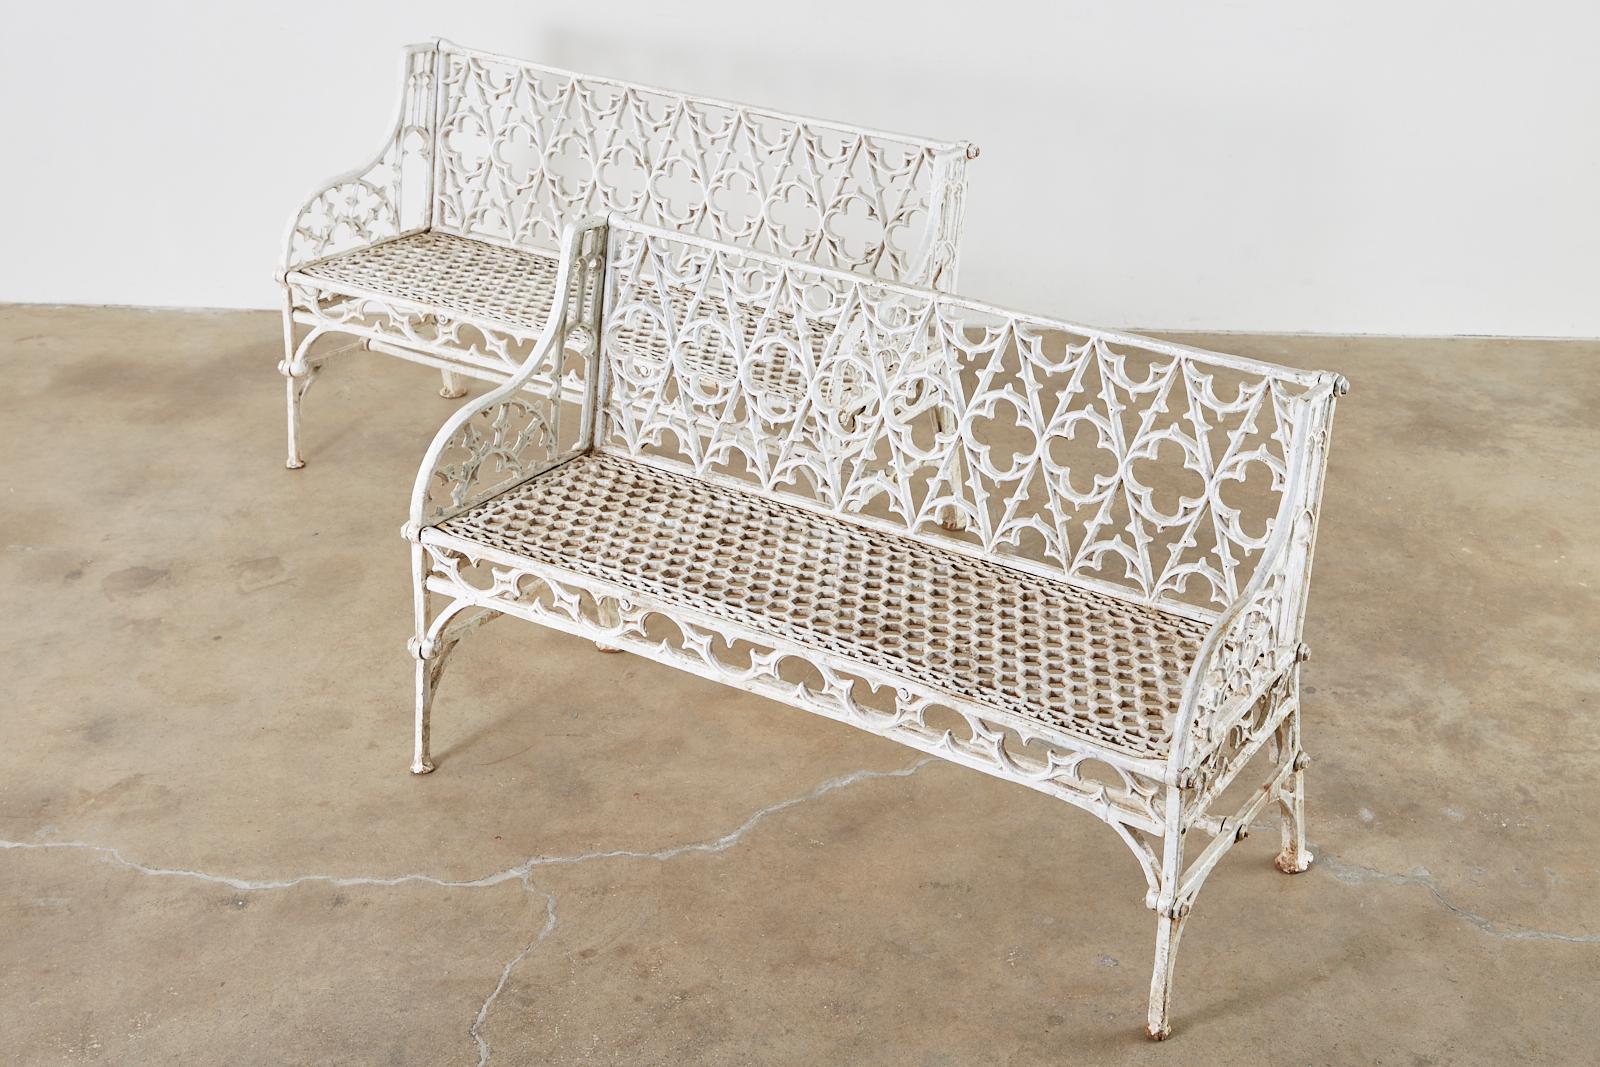 20th Century English Coalbrookdale Attributed Iron Gothic Revival Garden Benches